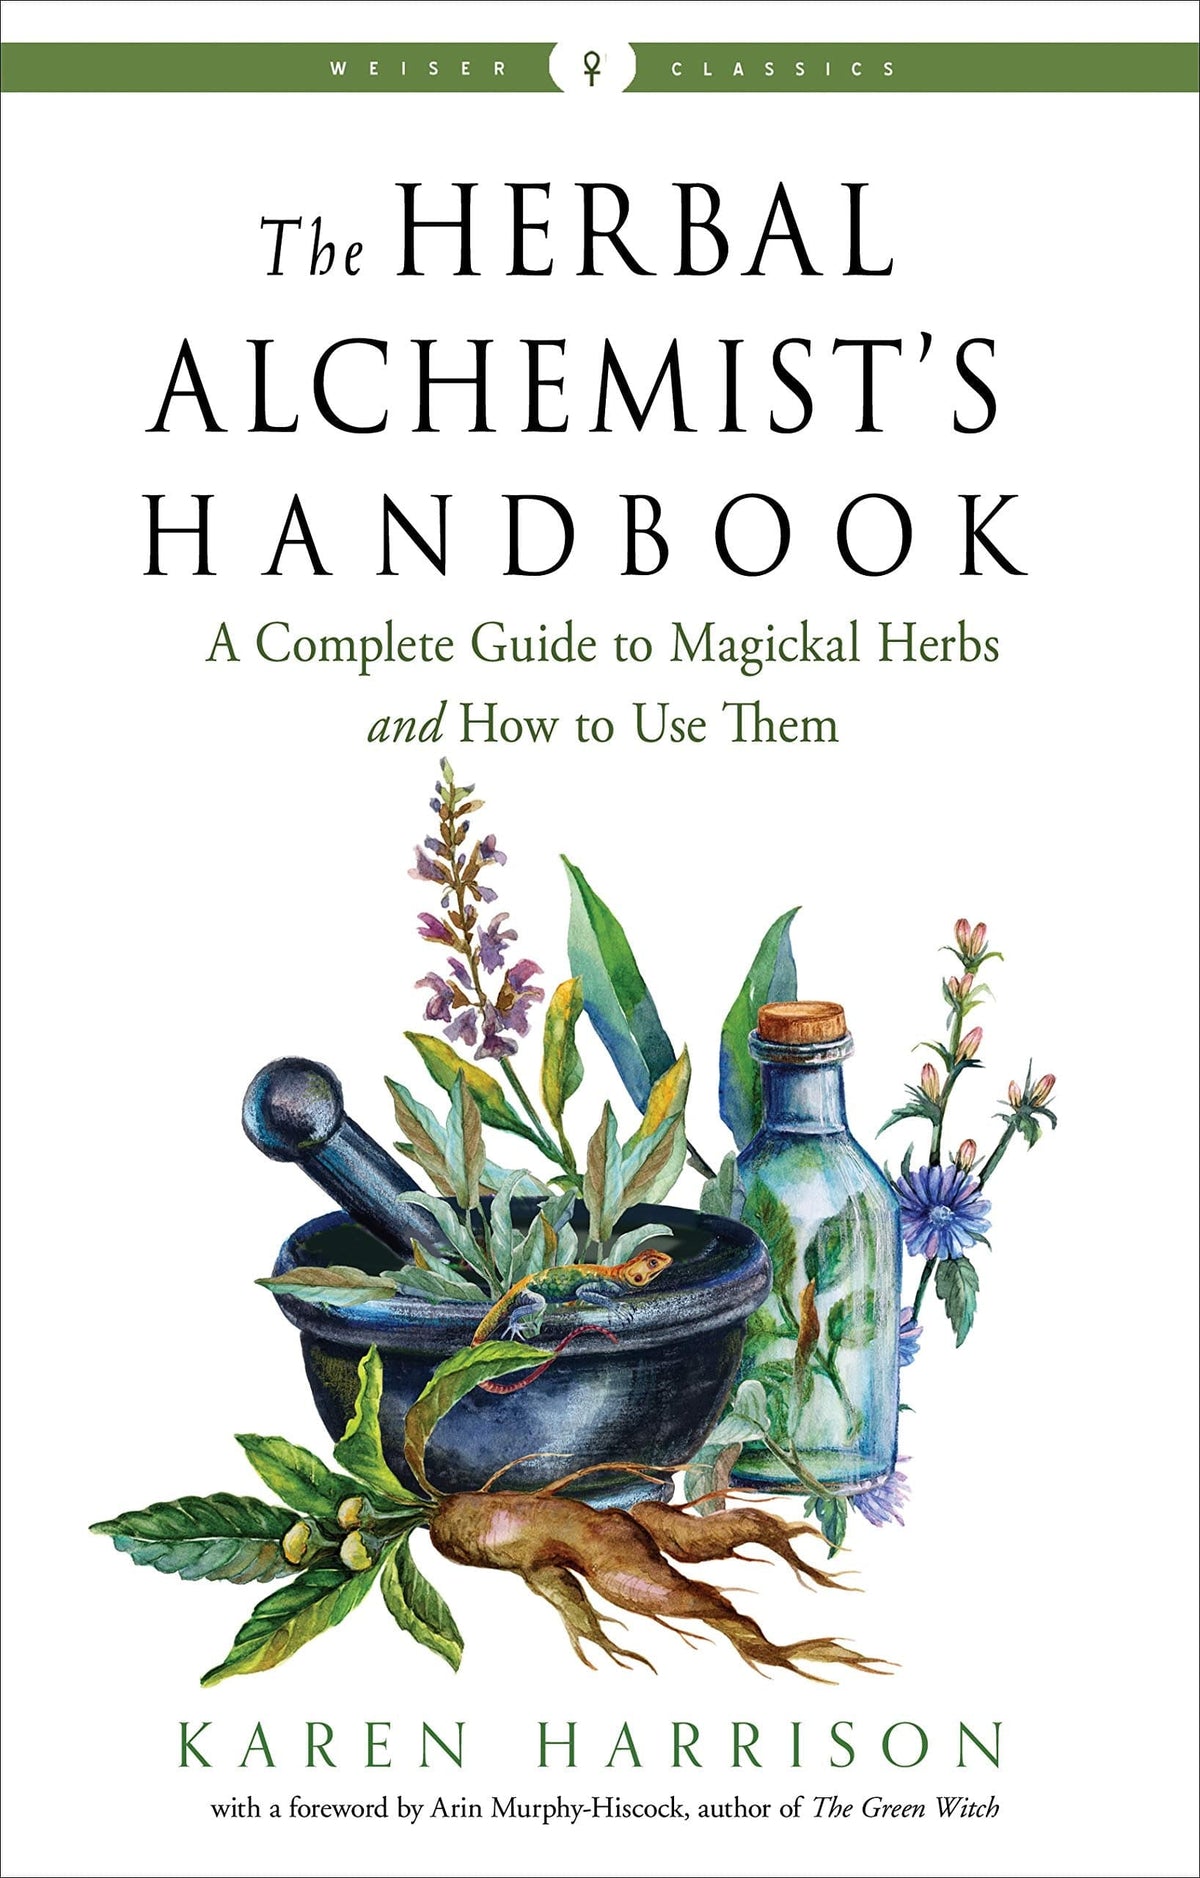 Herbal Alchemist's Handbook: Complete Guide to Magickal Herbs and How to Use Them by Karen Harrison - Third Eye